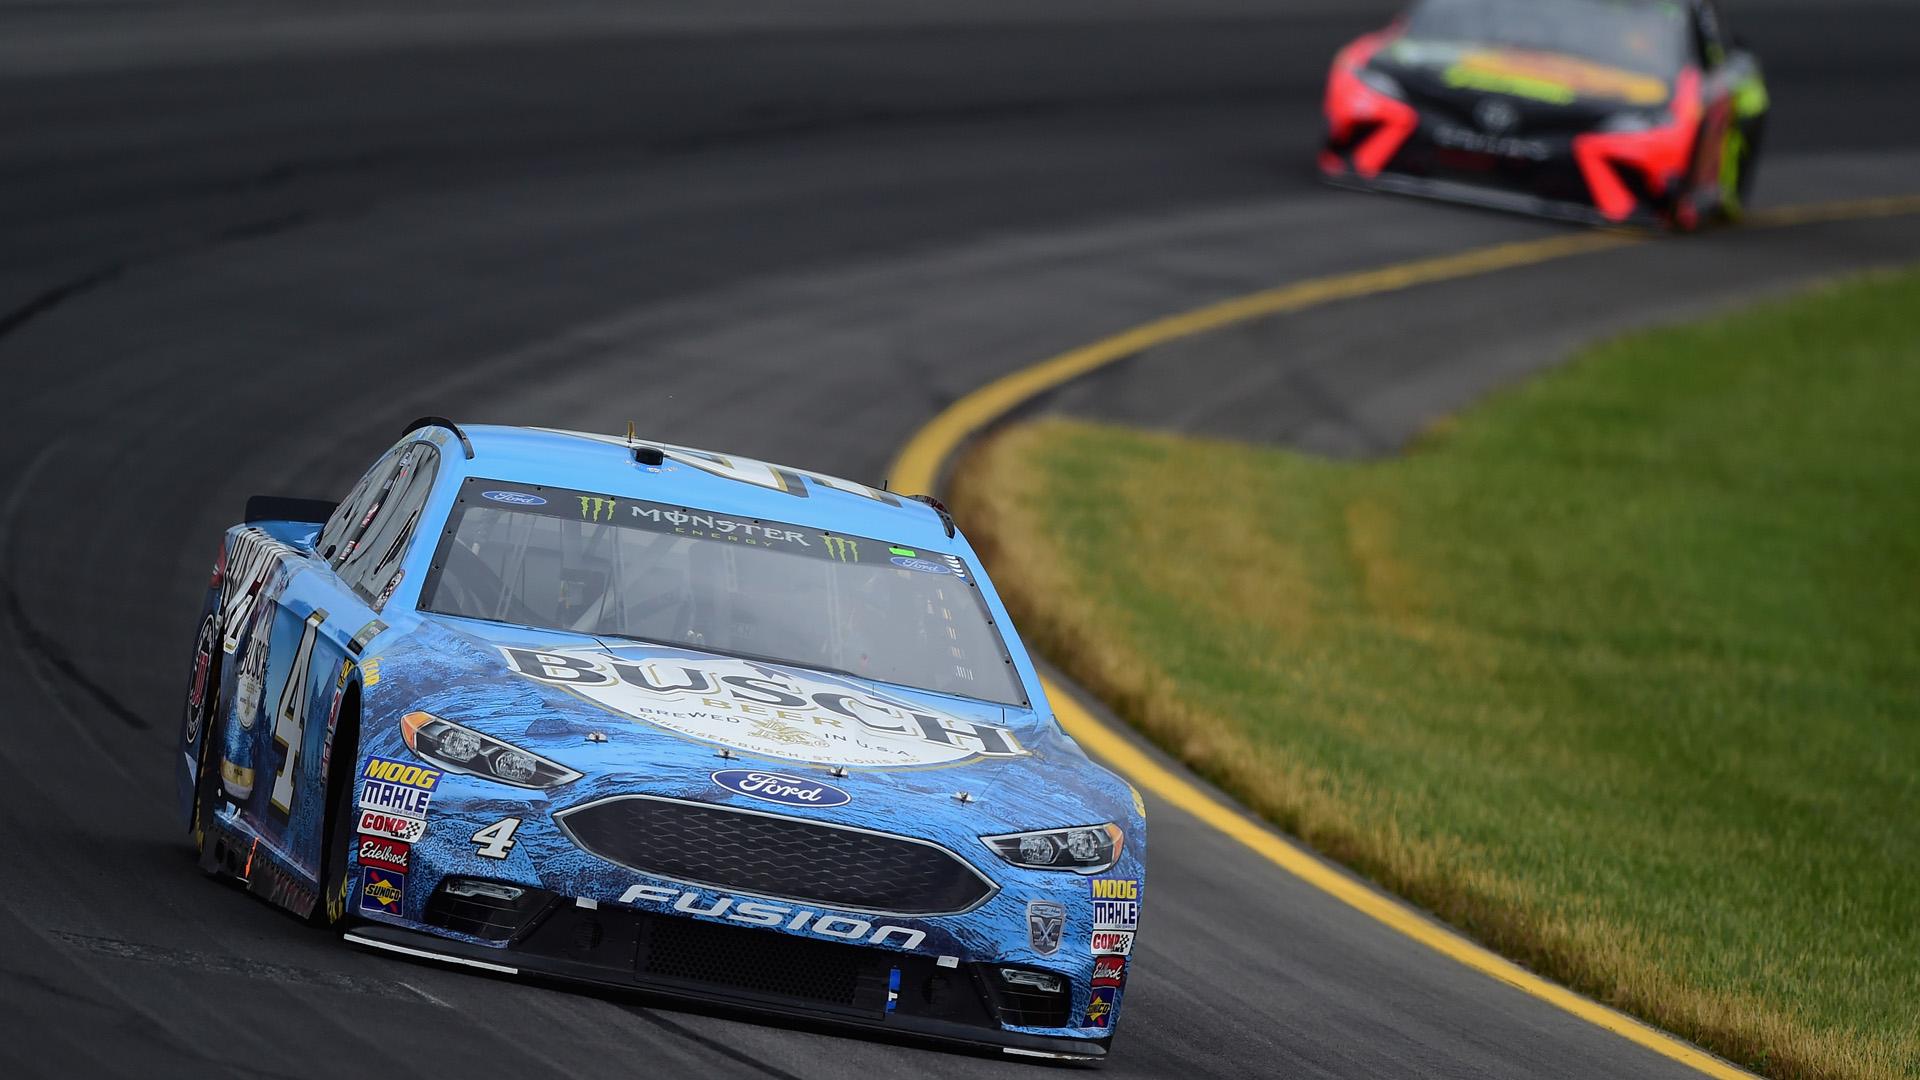 NASCAR results at New Hampshire: Kevin Harvick bumps Kyle Busch out